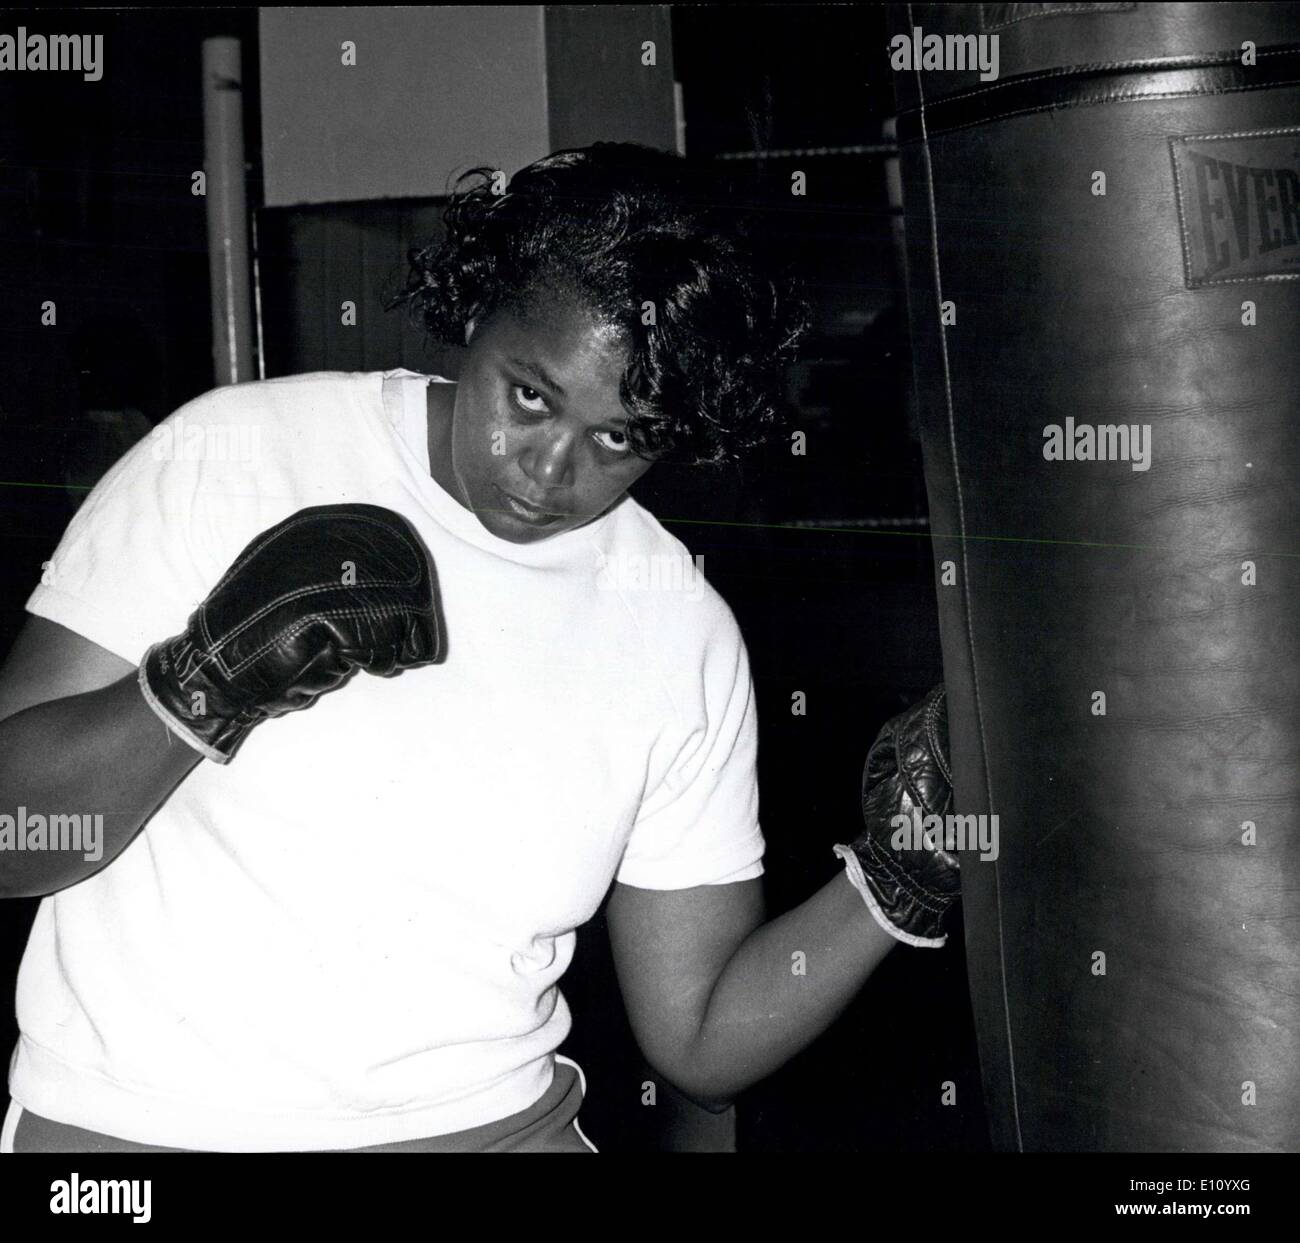 Oct. 18, 1974 - World?s first black women boxers ? Jackie